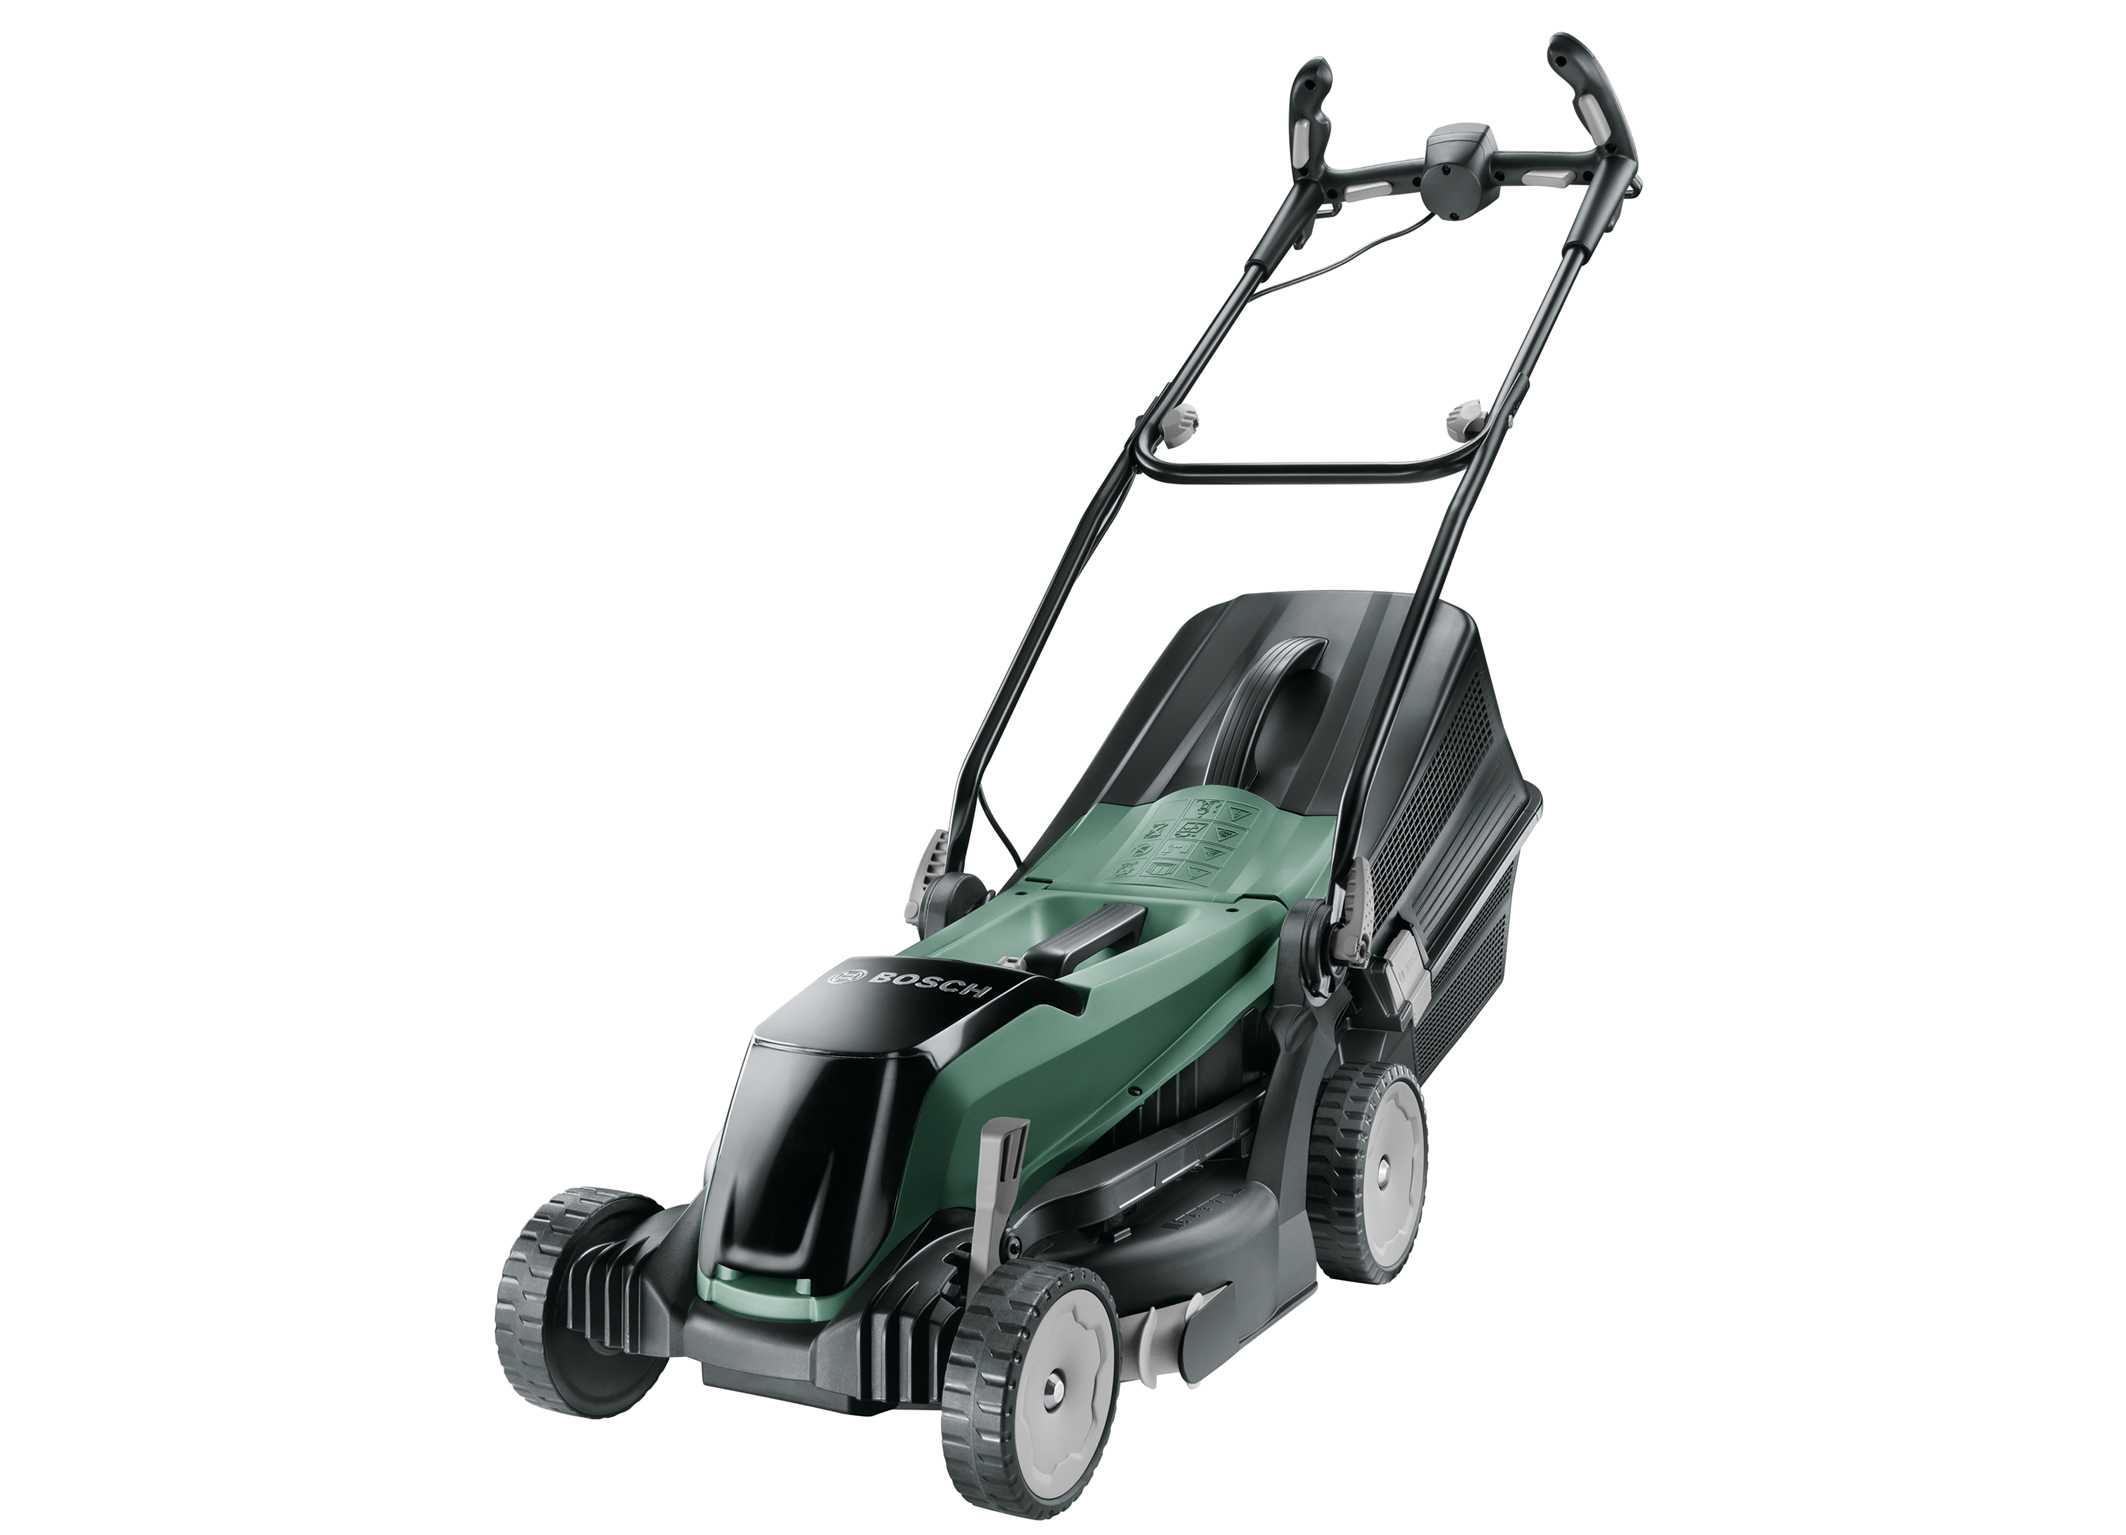 Powerful and particularly space-saving Bosch cordless lawnmower 36 V EasyRotak 36-550 